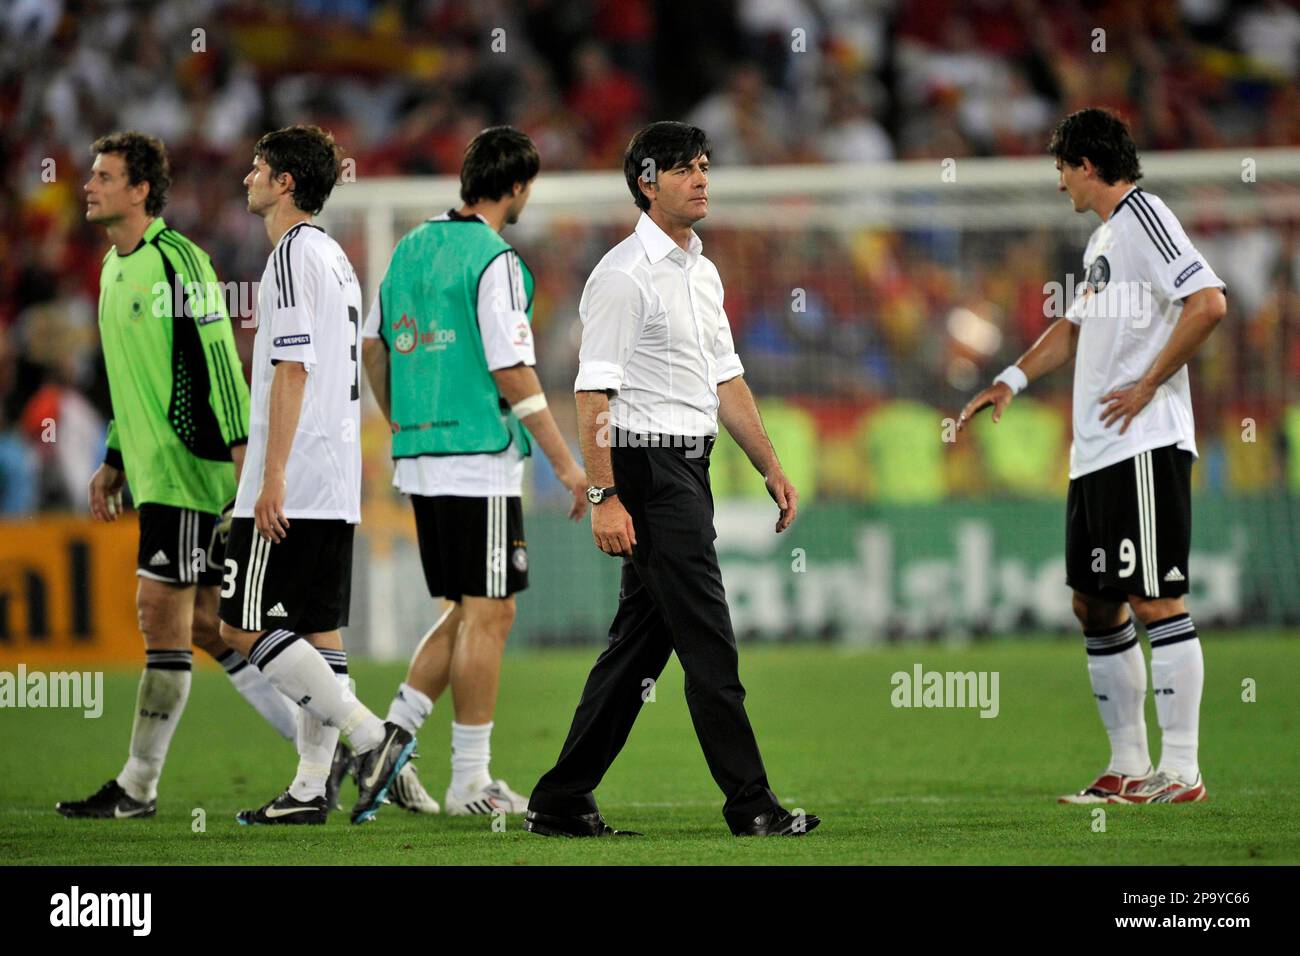 Germany's head coach Joachim Loew, center, reacts at the end of the Euro 2008 final between Germany and Spain in the Ernst-Happel stadium in Vienna, Austria, Sunday, June 29, 2008, the last day of the European Soccer Championships in Austria and Switzerland. Spain defeated Germany 1-0. (AP Photo/Martin Meissner) Stock Photo